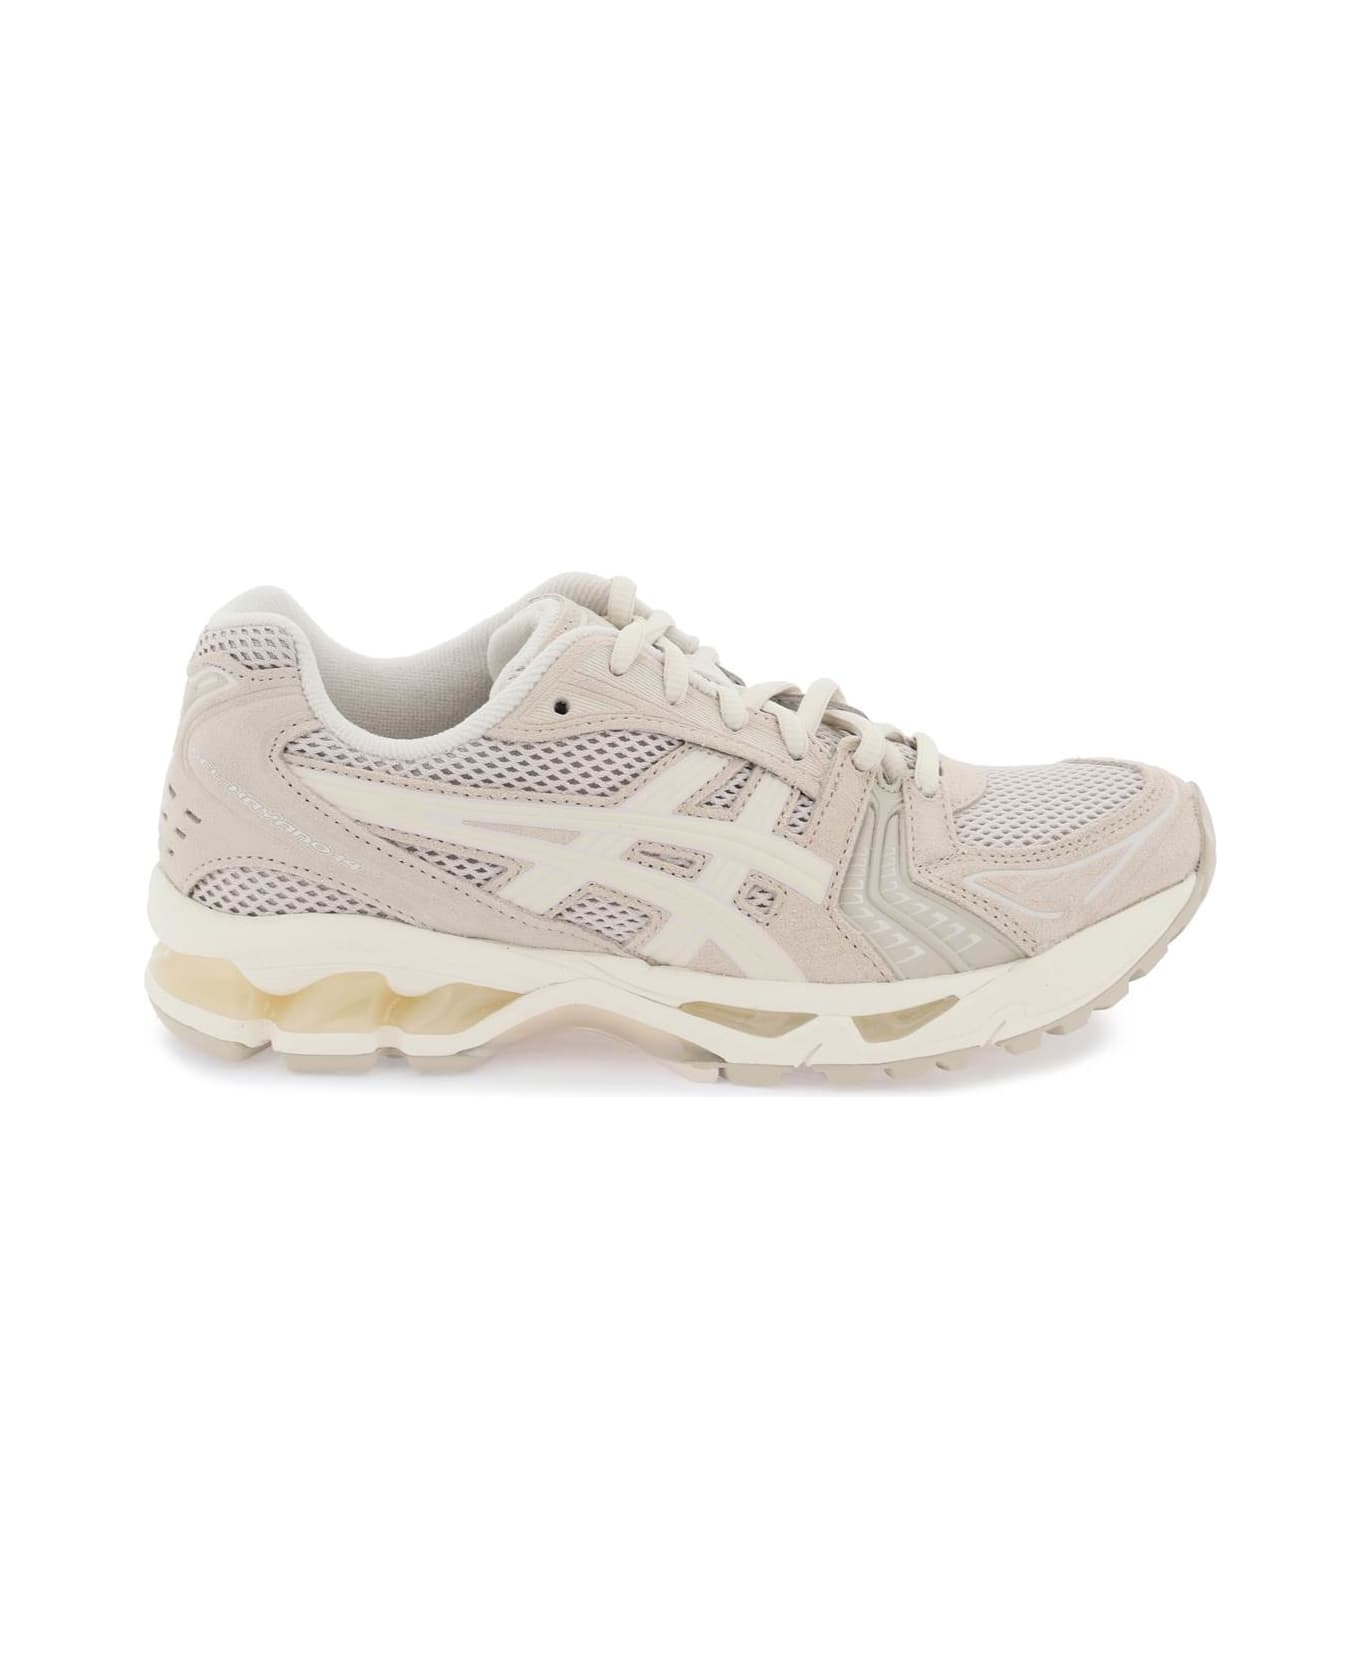 Asics Gel-kayano 14 Sneakers - SIMPLY TAUPE OATMEAL (Beige)